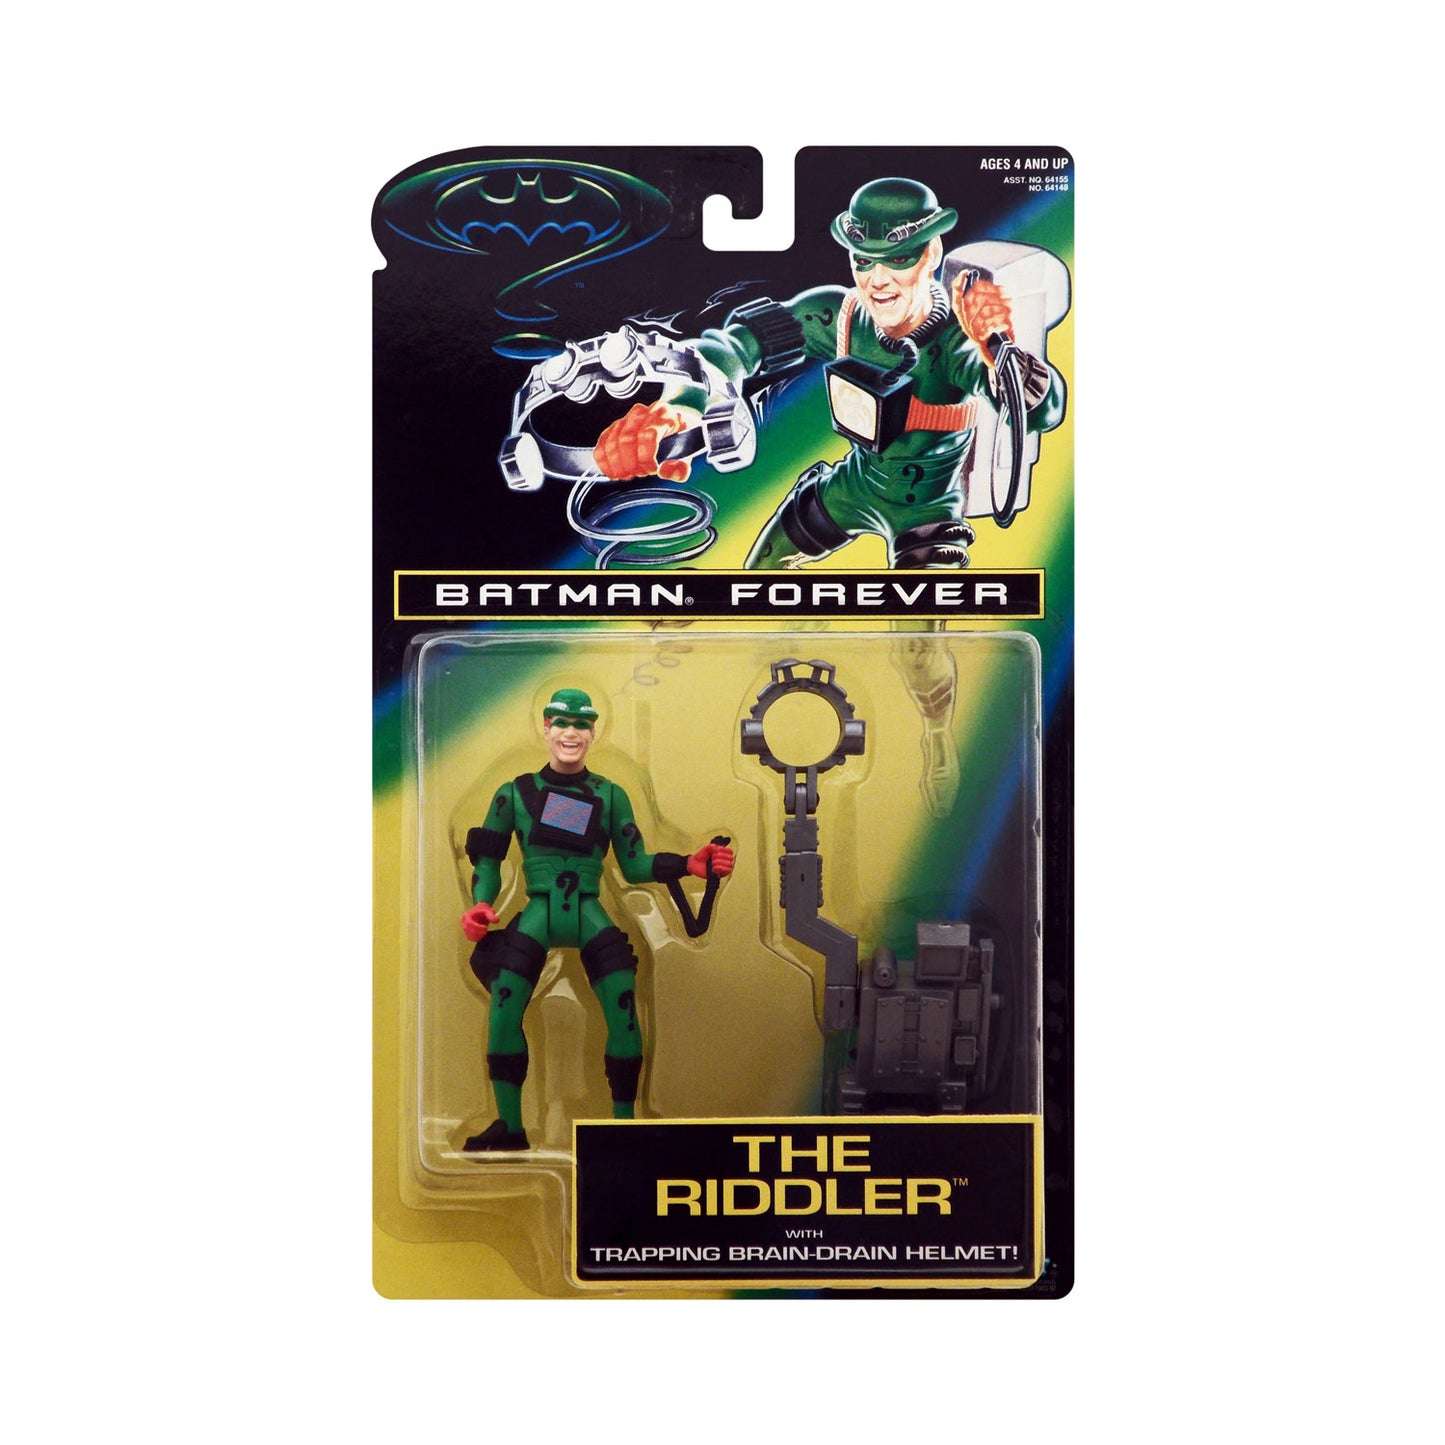 The Riddler with Trapping Brain-Drain Helmet Action Figure from Batman Forever